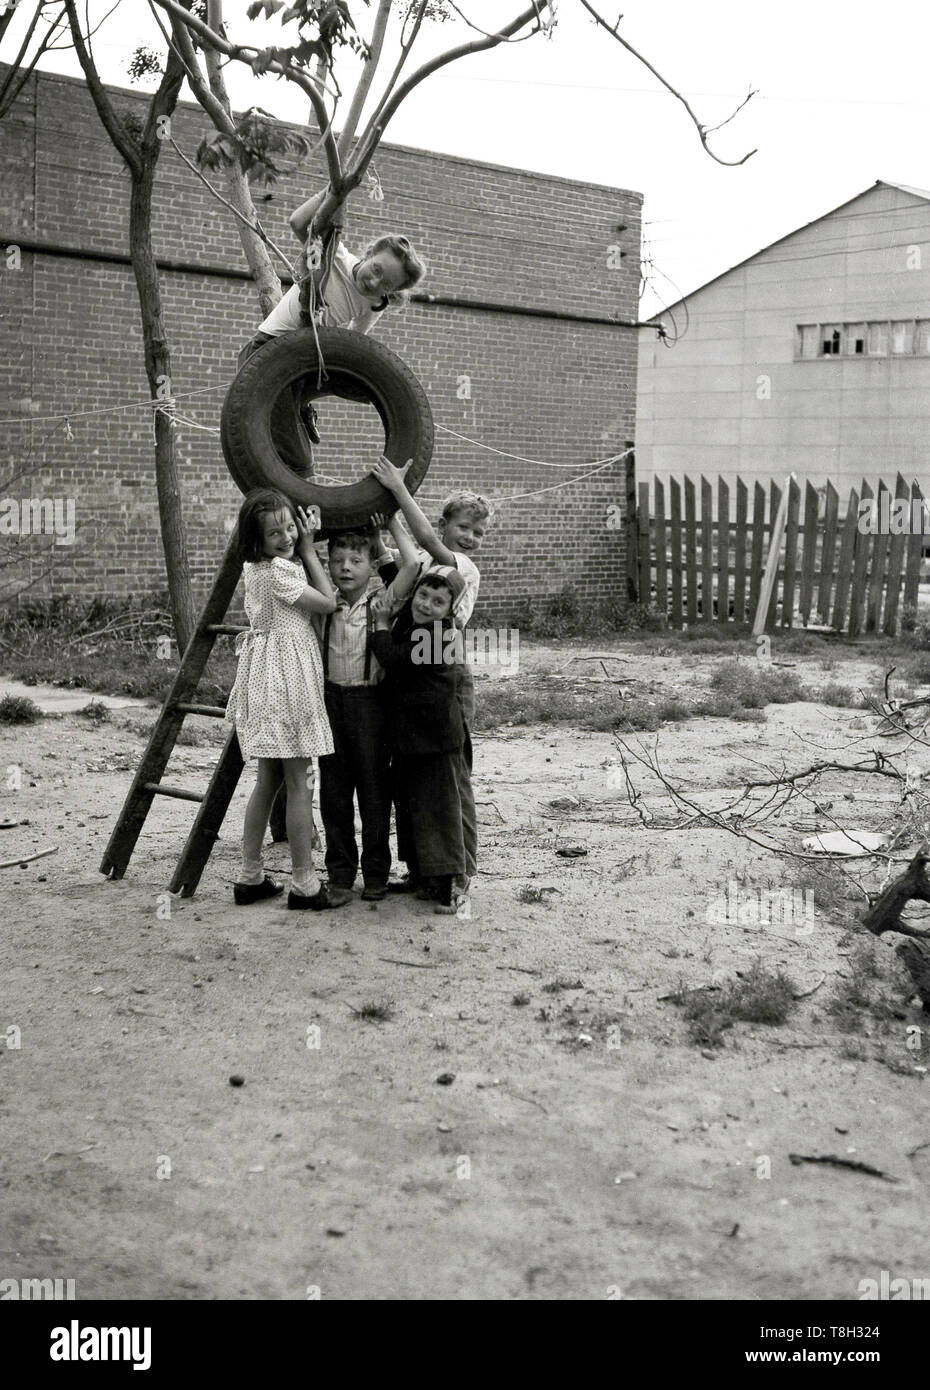 1970s, historical, hanging up a tyre swing....four young children standing together outside in a sandy industrial area of land or yard, holding up a rubber car tyre, while a young girl having climbed a ladder to get up a small tree, is trying to attach it to it with string.  Trye swings are great fun for to children to play on when growing up and it is also recycling. Stock Photo